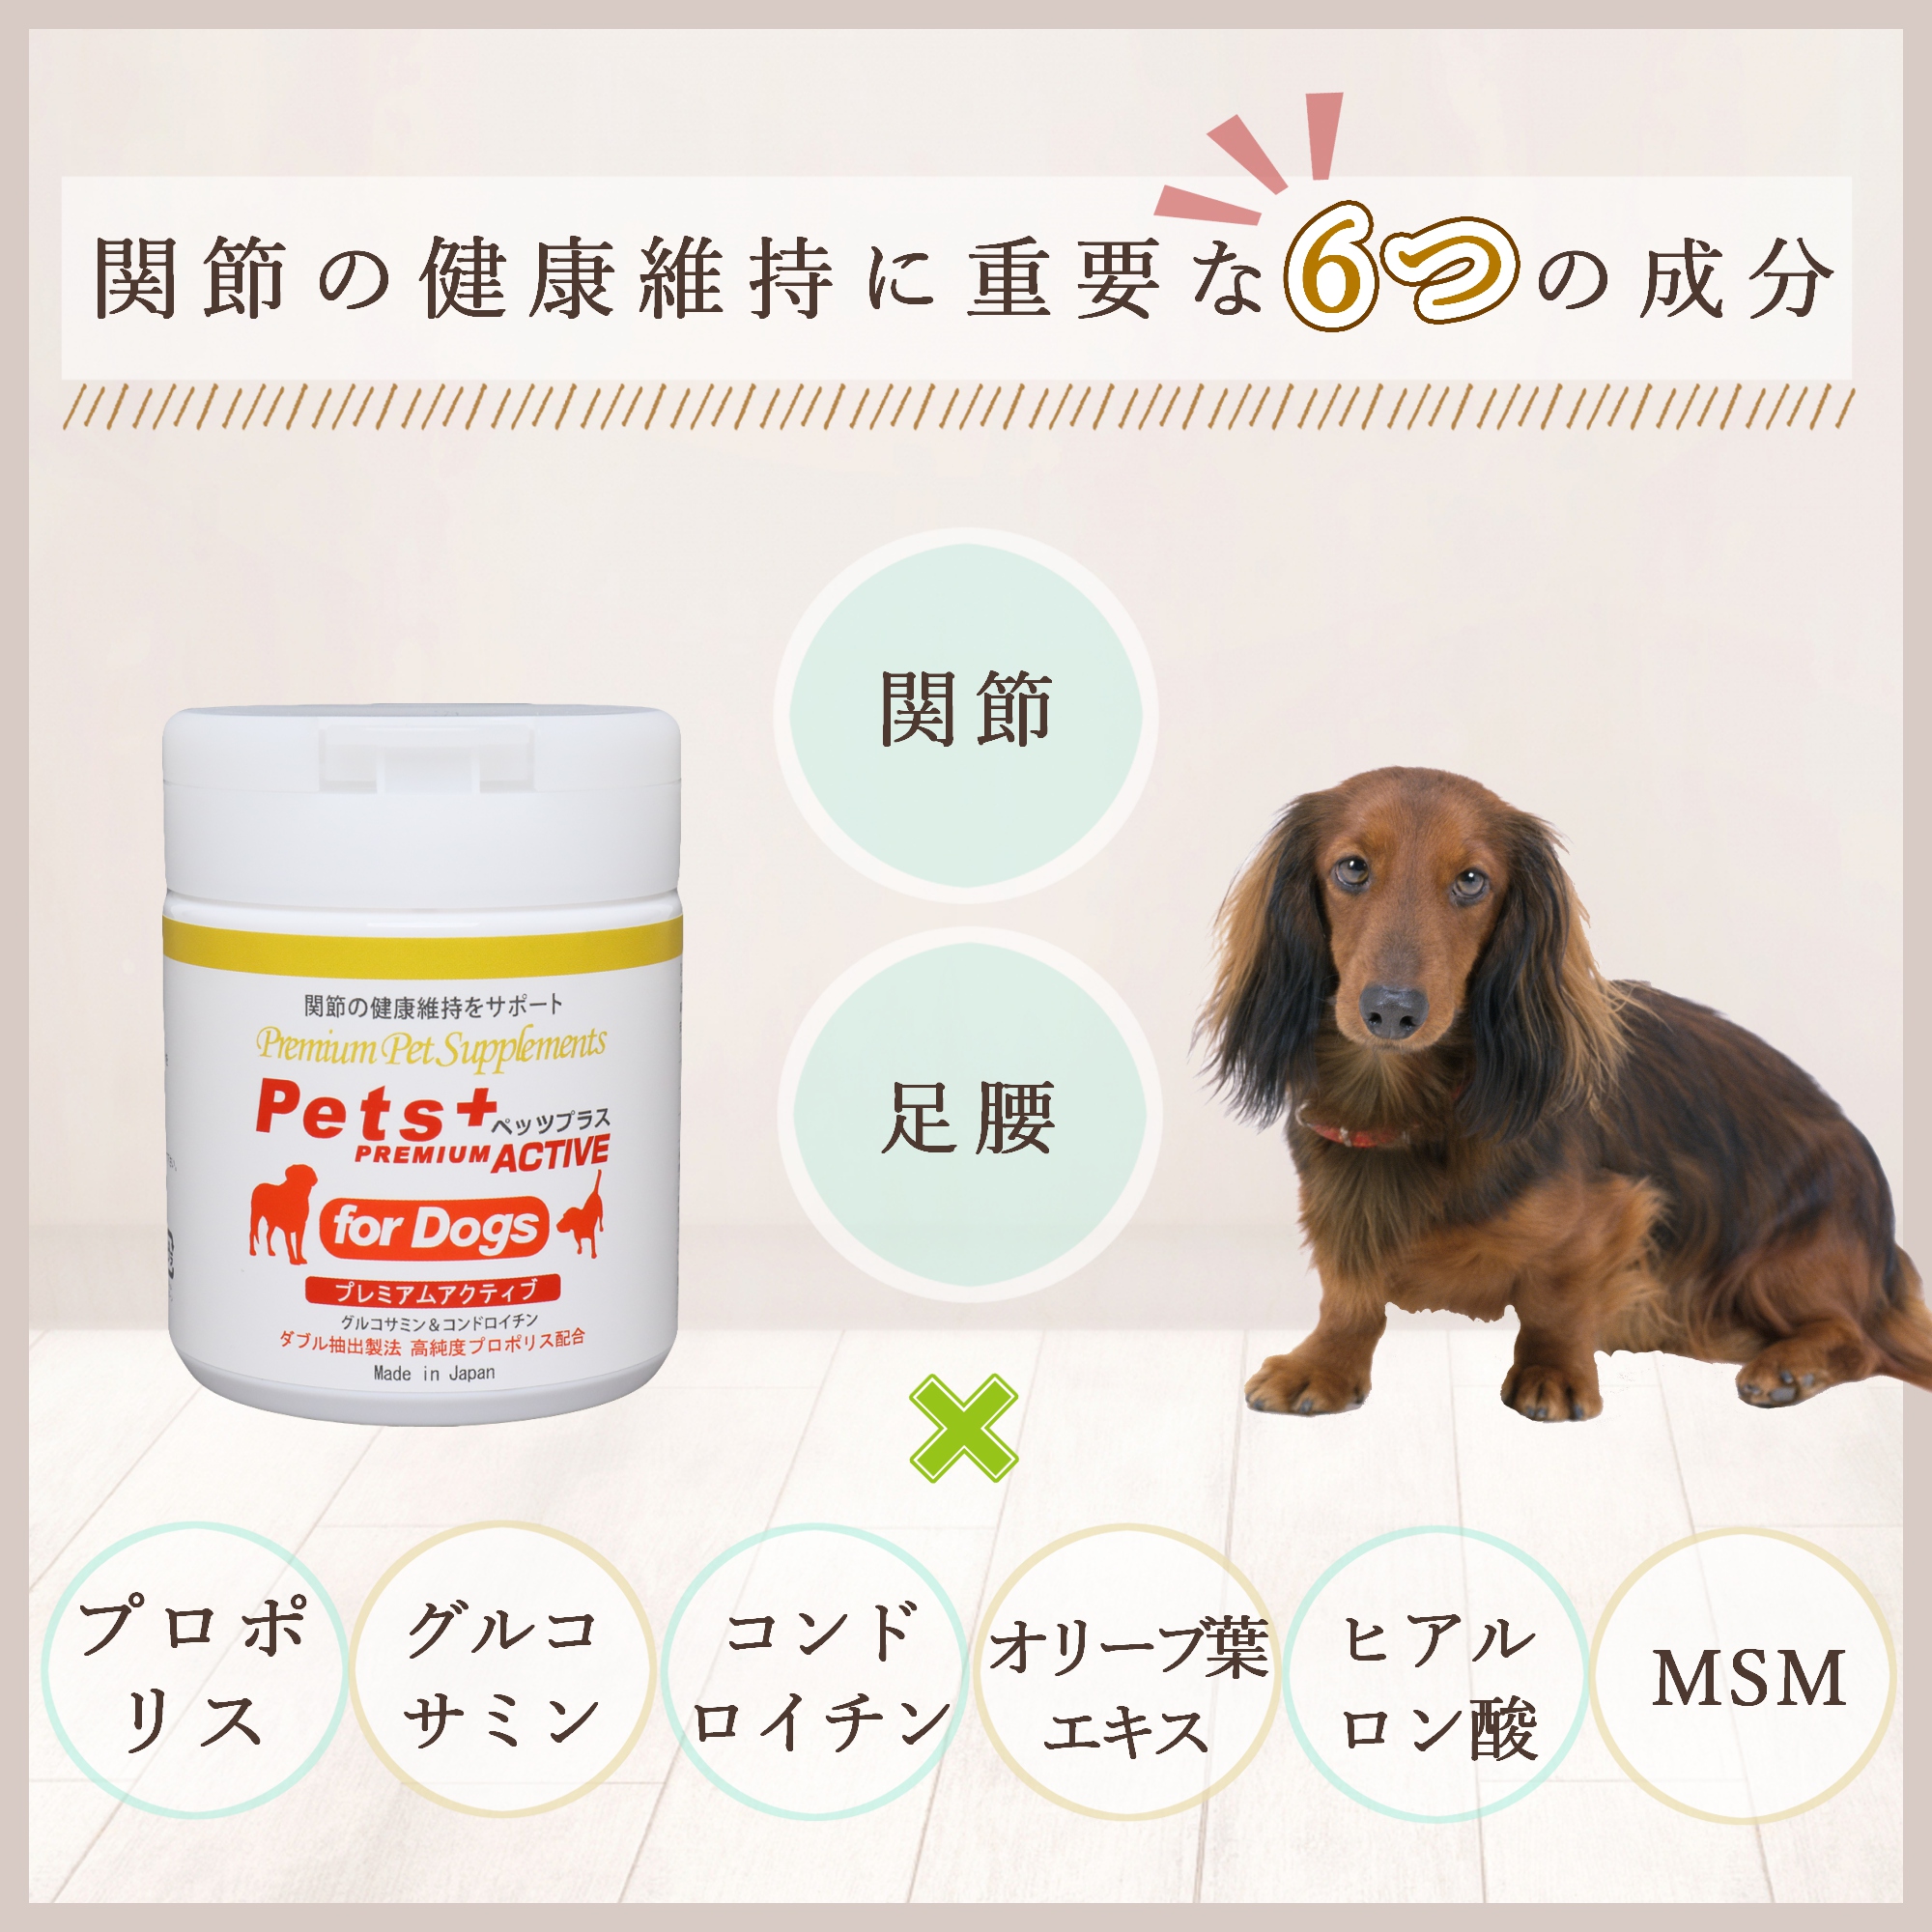 ... small of the back dog. supplement propolis glucosamine chondroitin hyaluronic acid dog pet supplement petsu plus premium active 